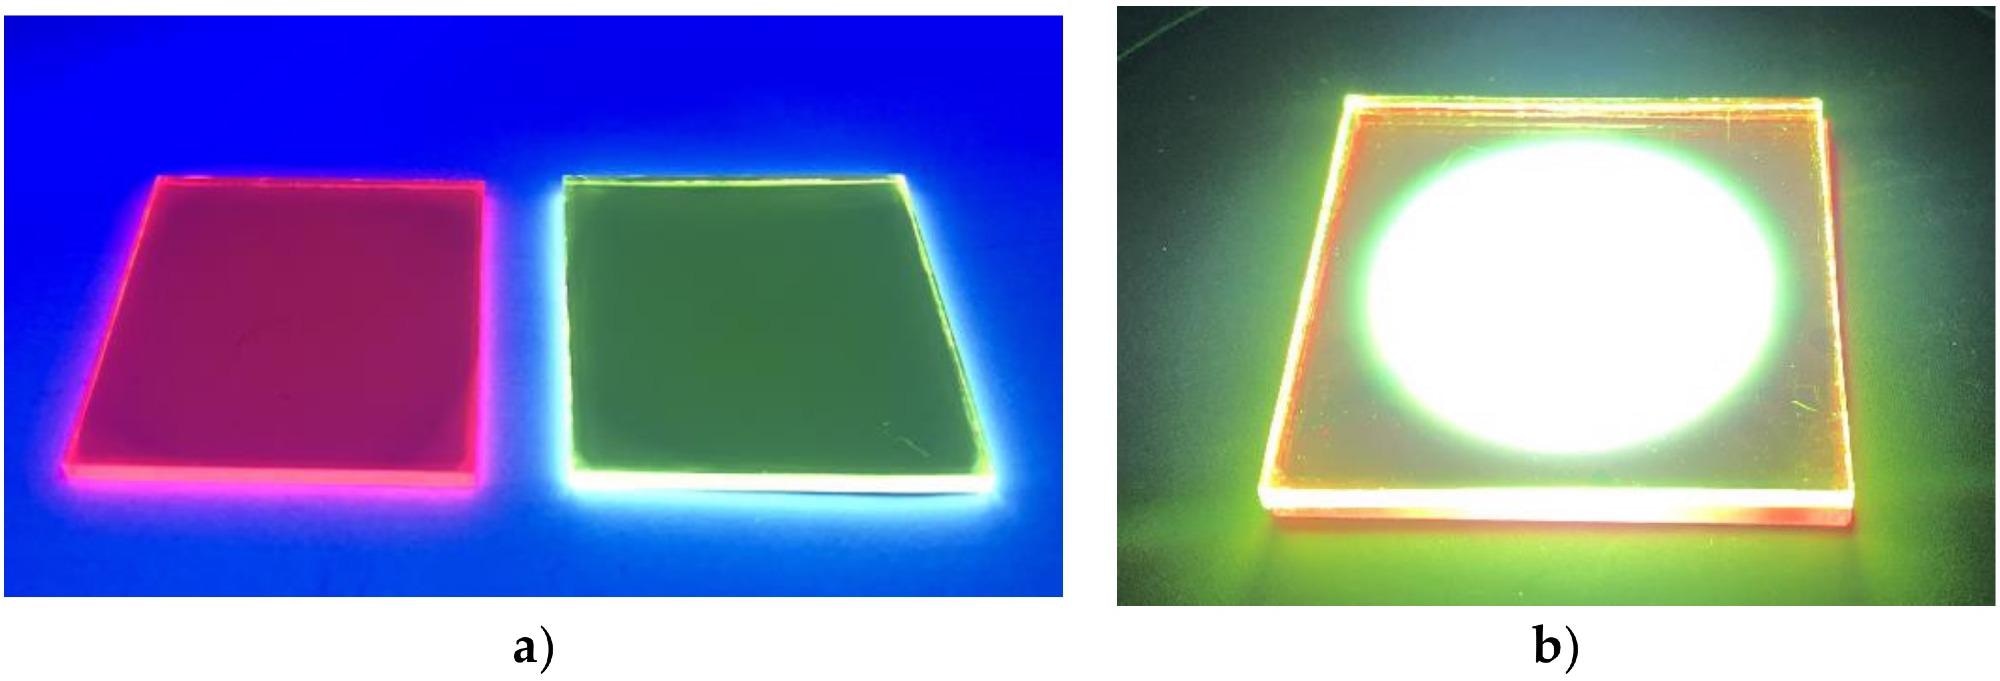 (a) Photoluminescent red-emitting and green-emitting converters embedded in a PMMA matrix and coated on glass under exposure to blue light. (b) White light emitted by the WLED-11-I device.